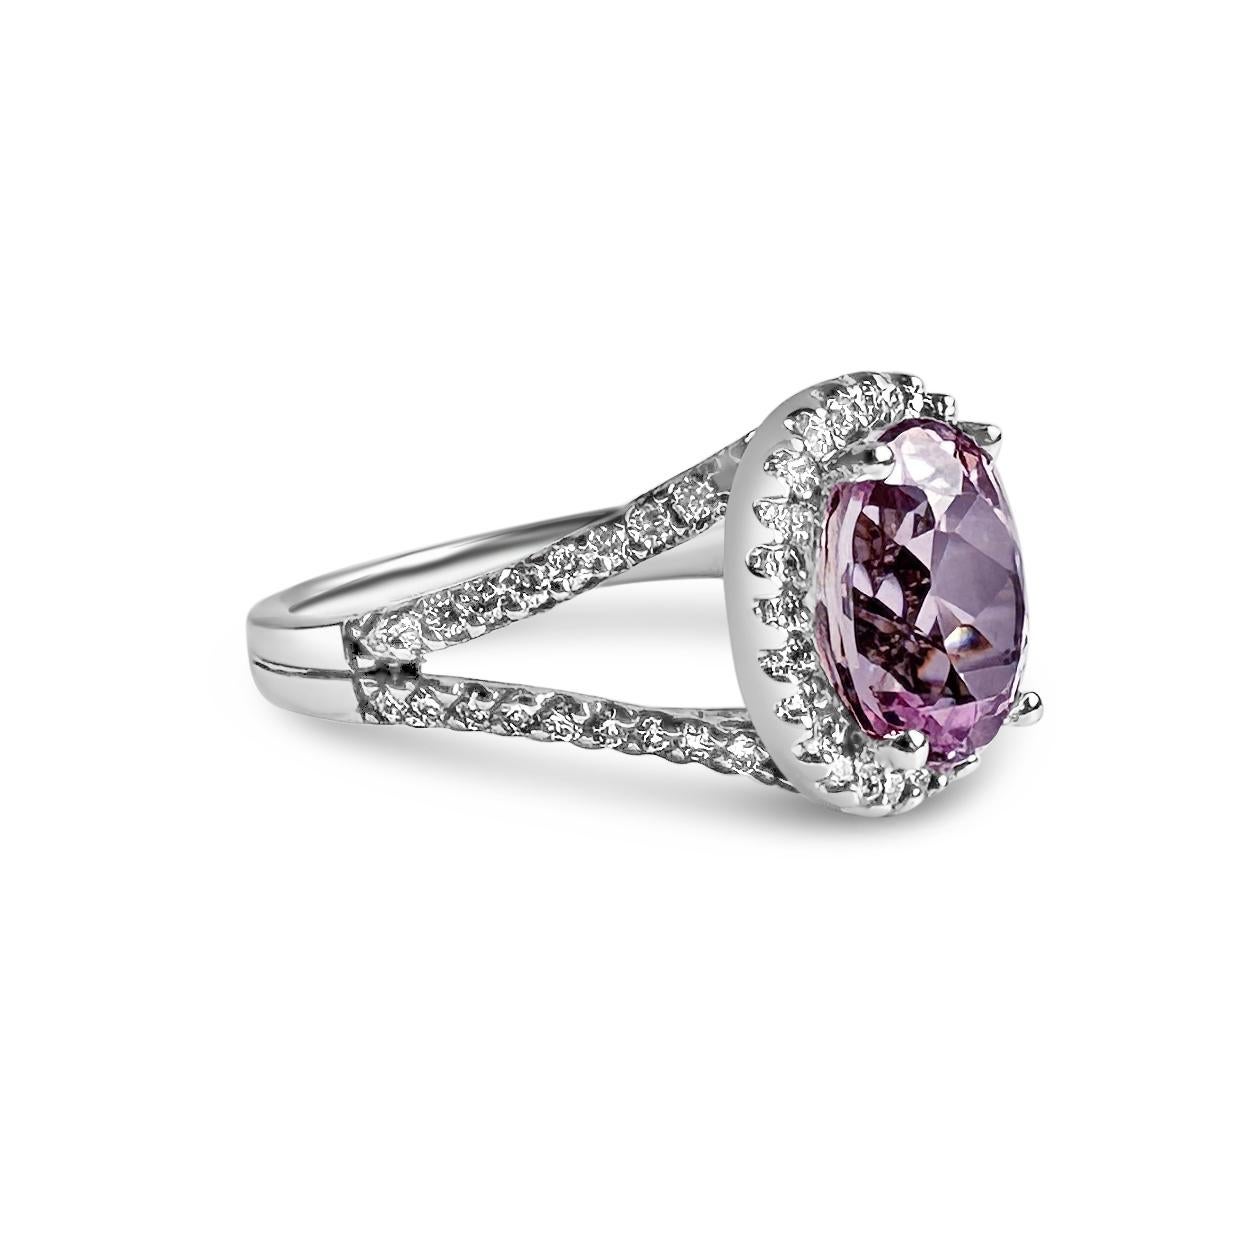 Modern 14K White Gold Ring with 68 Round 1.2mm Diamonds & Oval Pink Kunzite by Manart For Sale